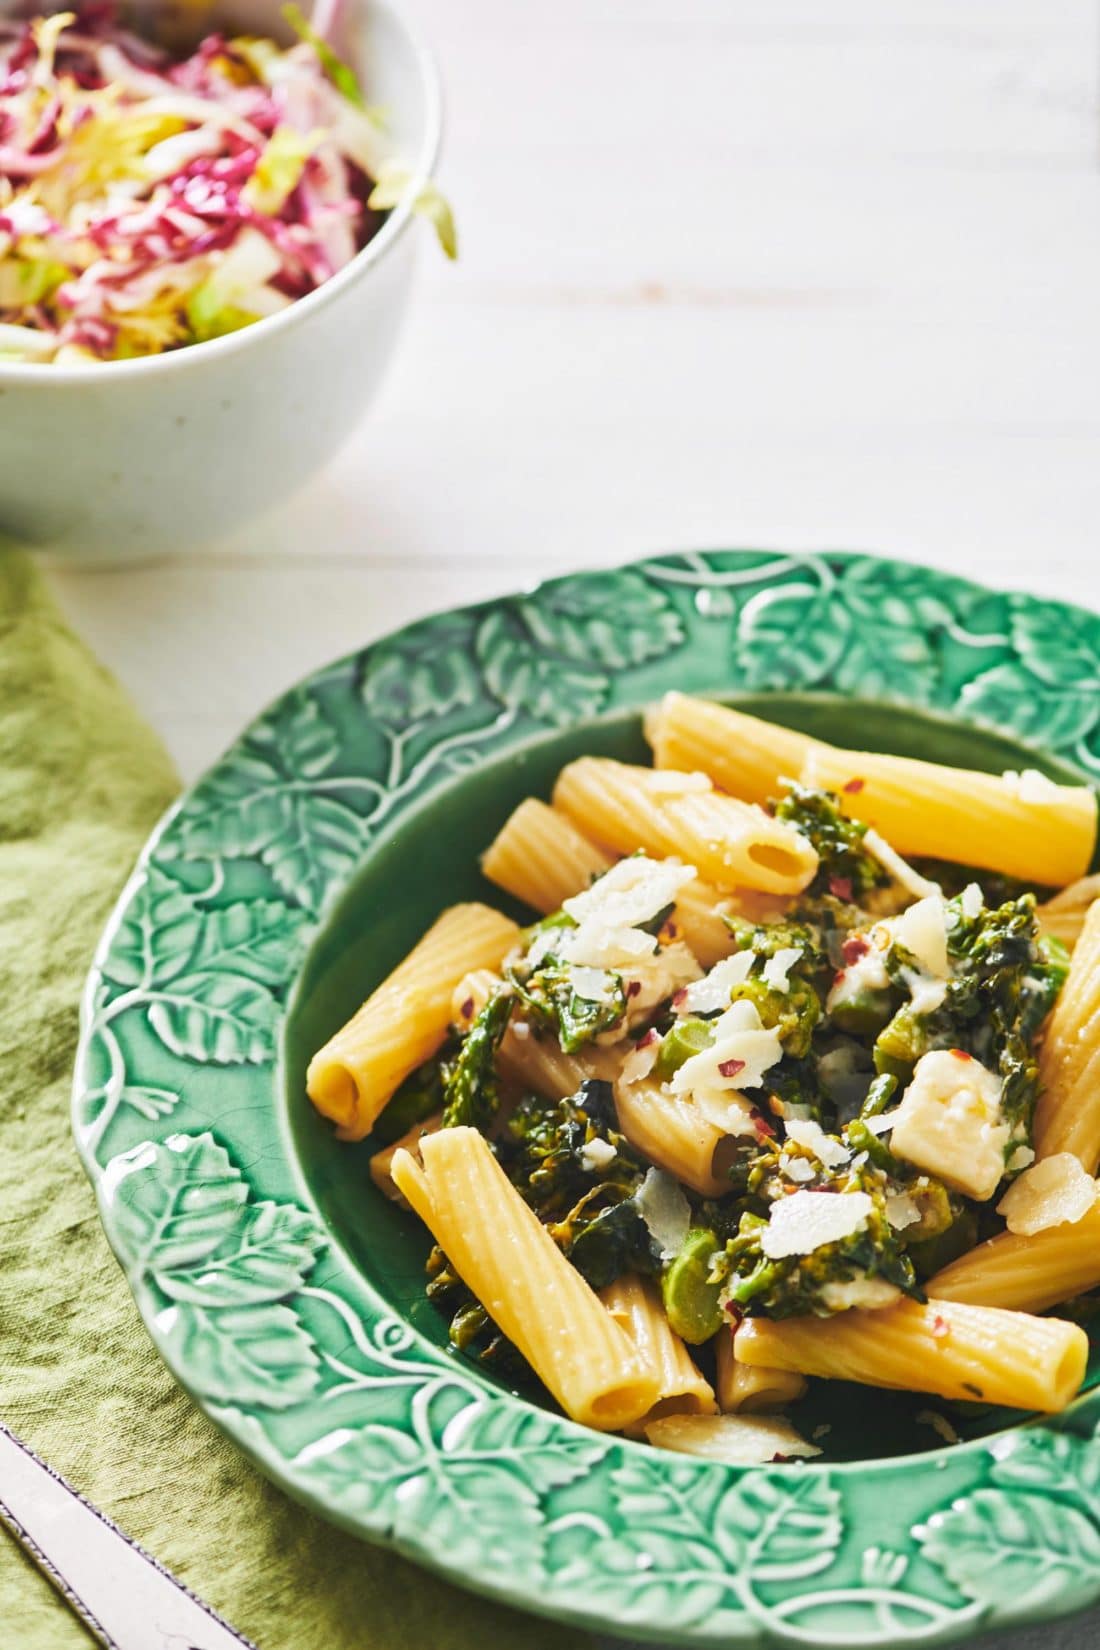 Plate of Pasta with Feta and Broccolini.